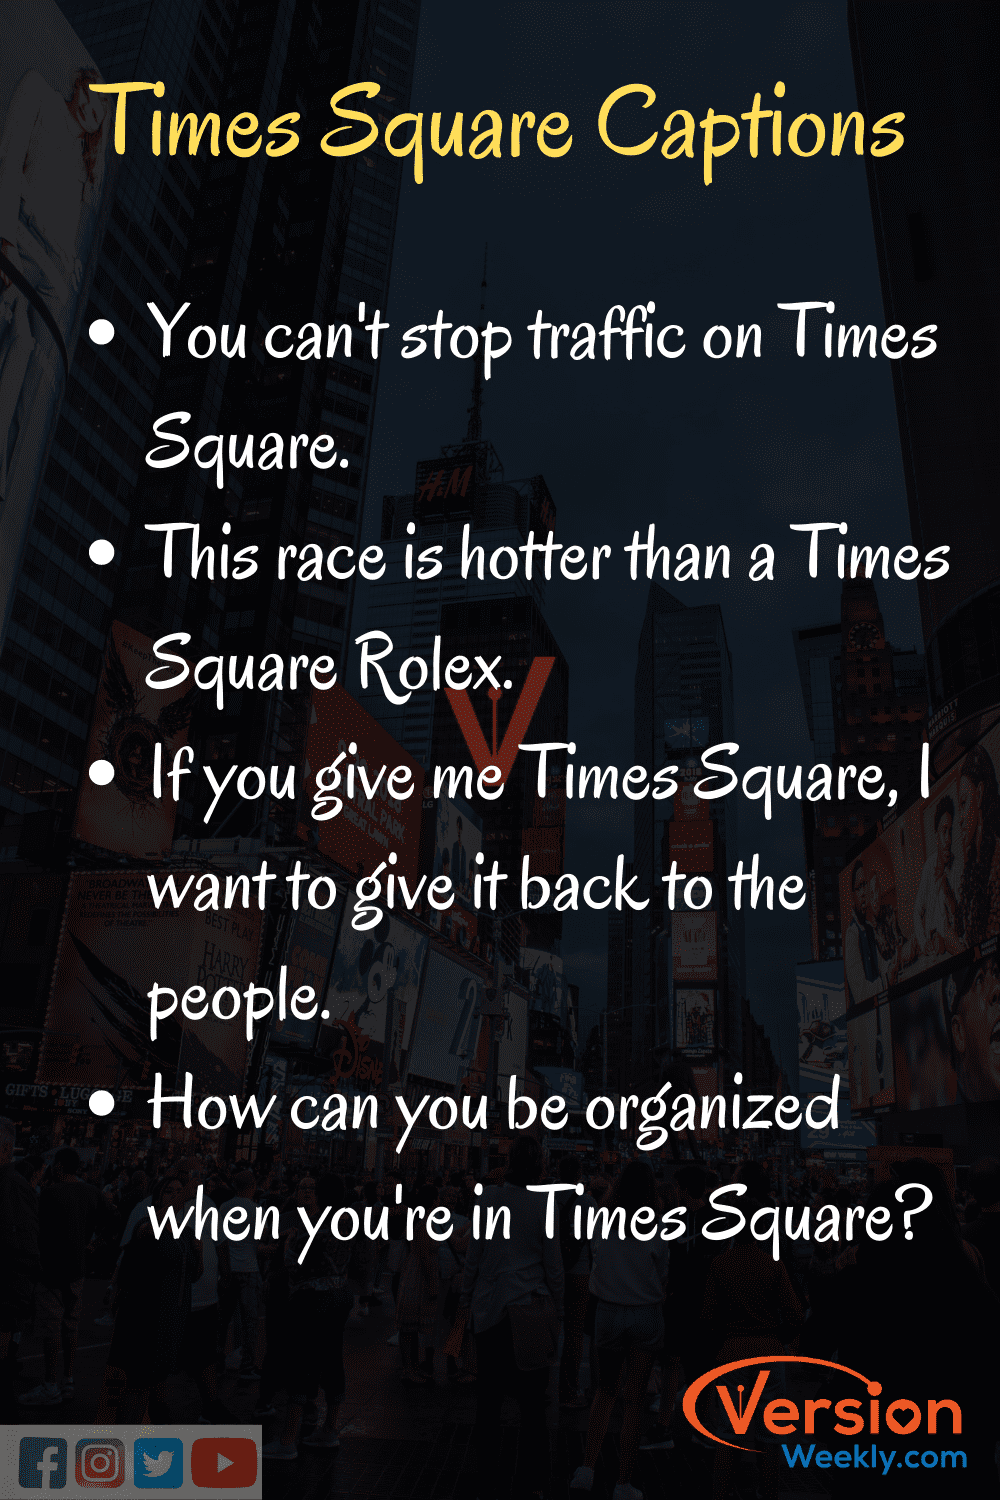 Instagram Captions for Times square